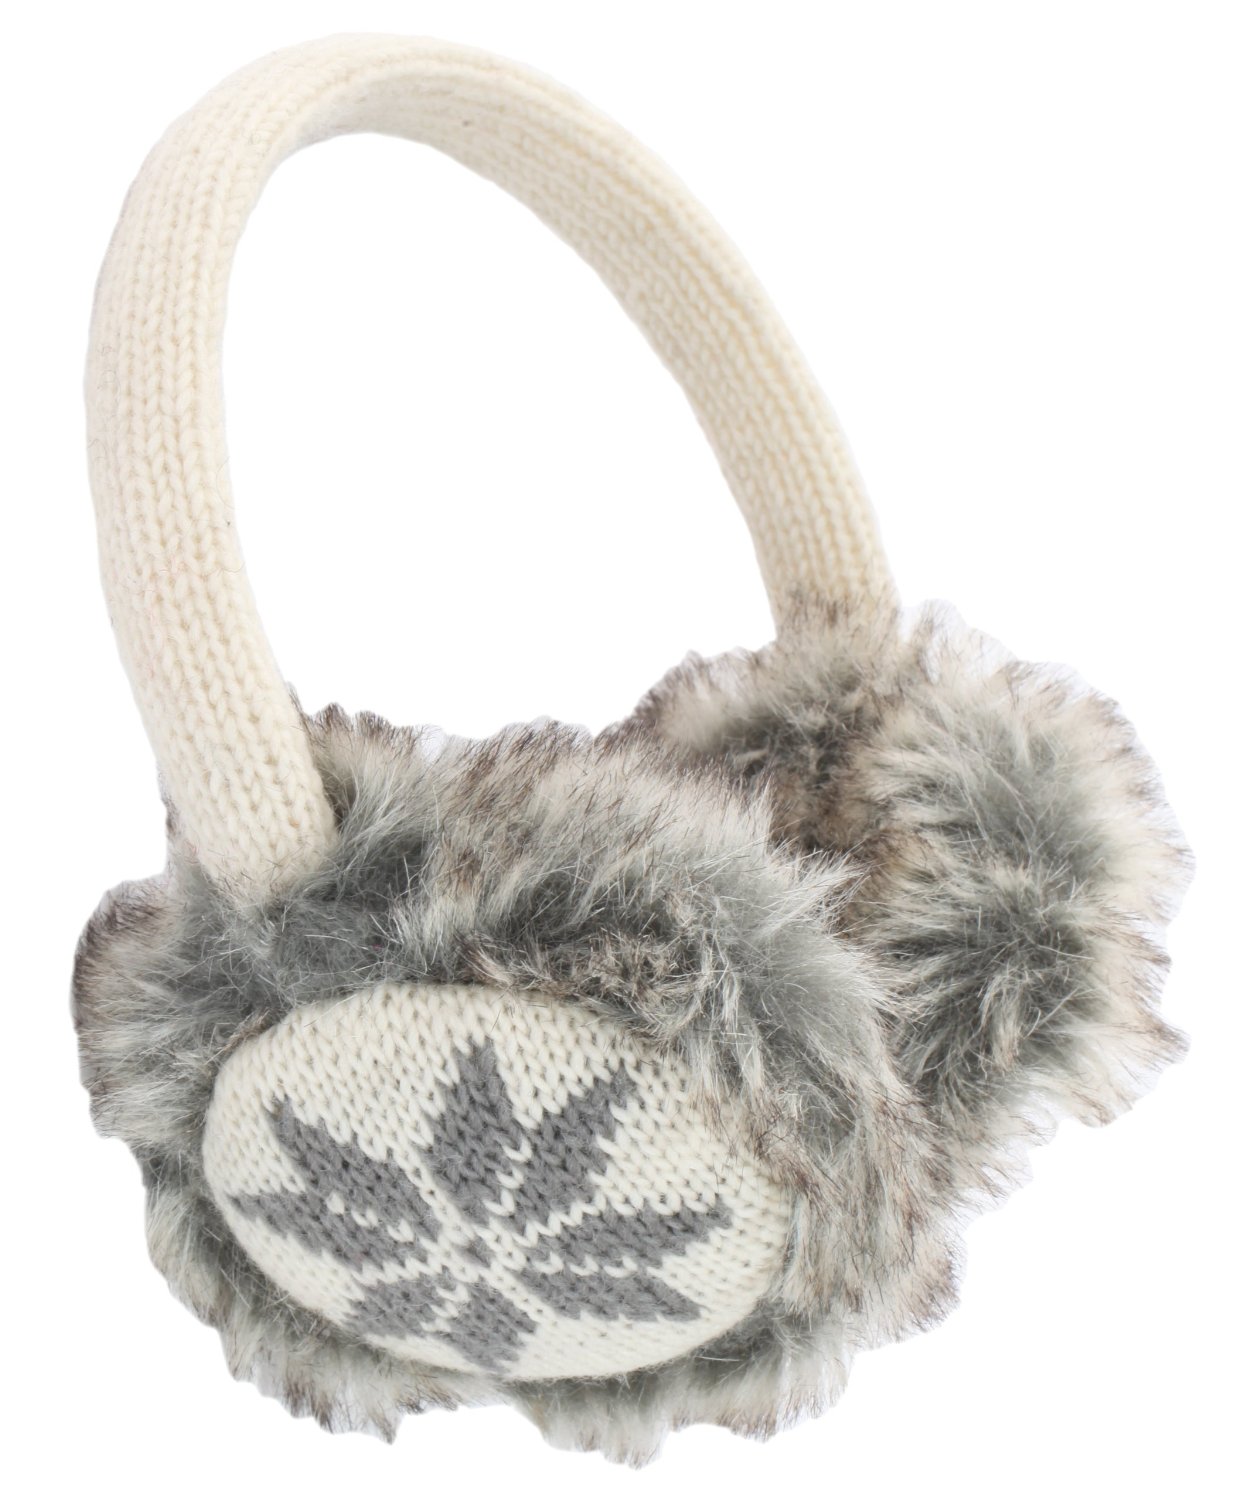 30 Cute and Fluffy Winter Ear Muffs Style Arena